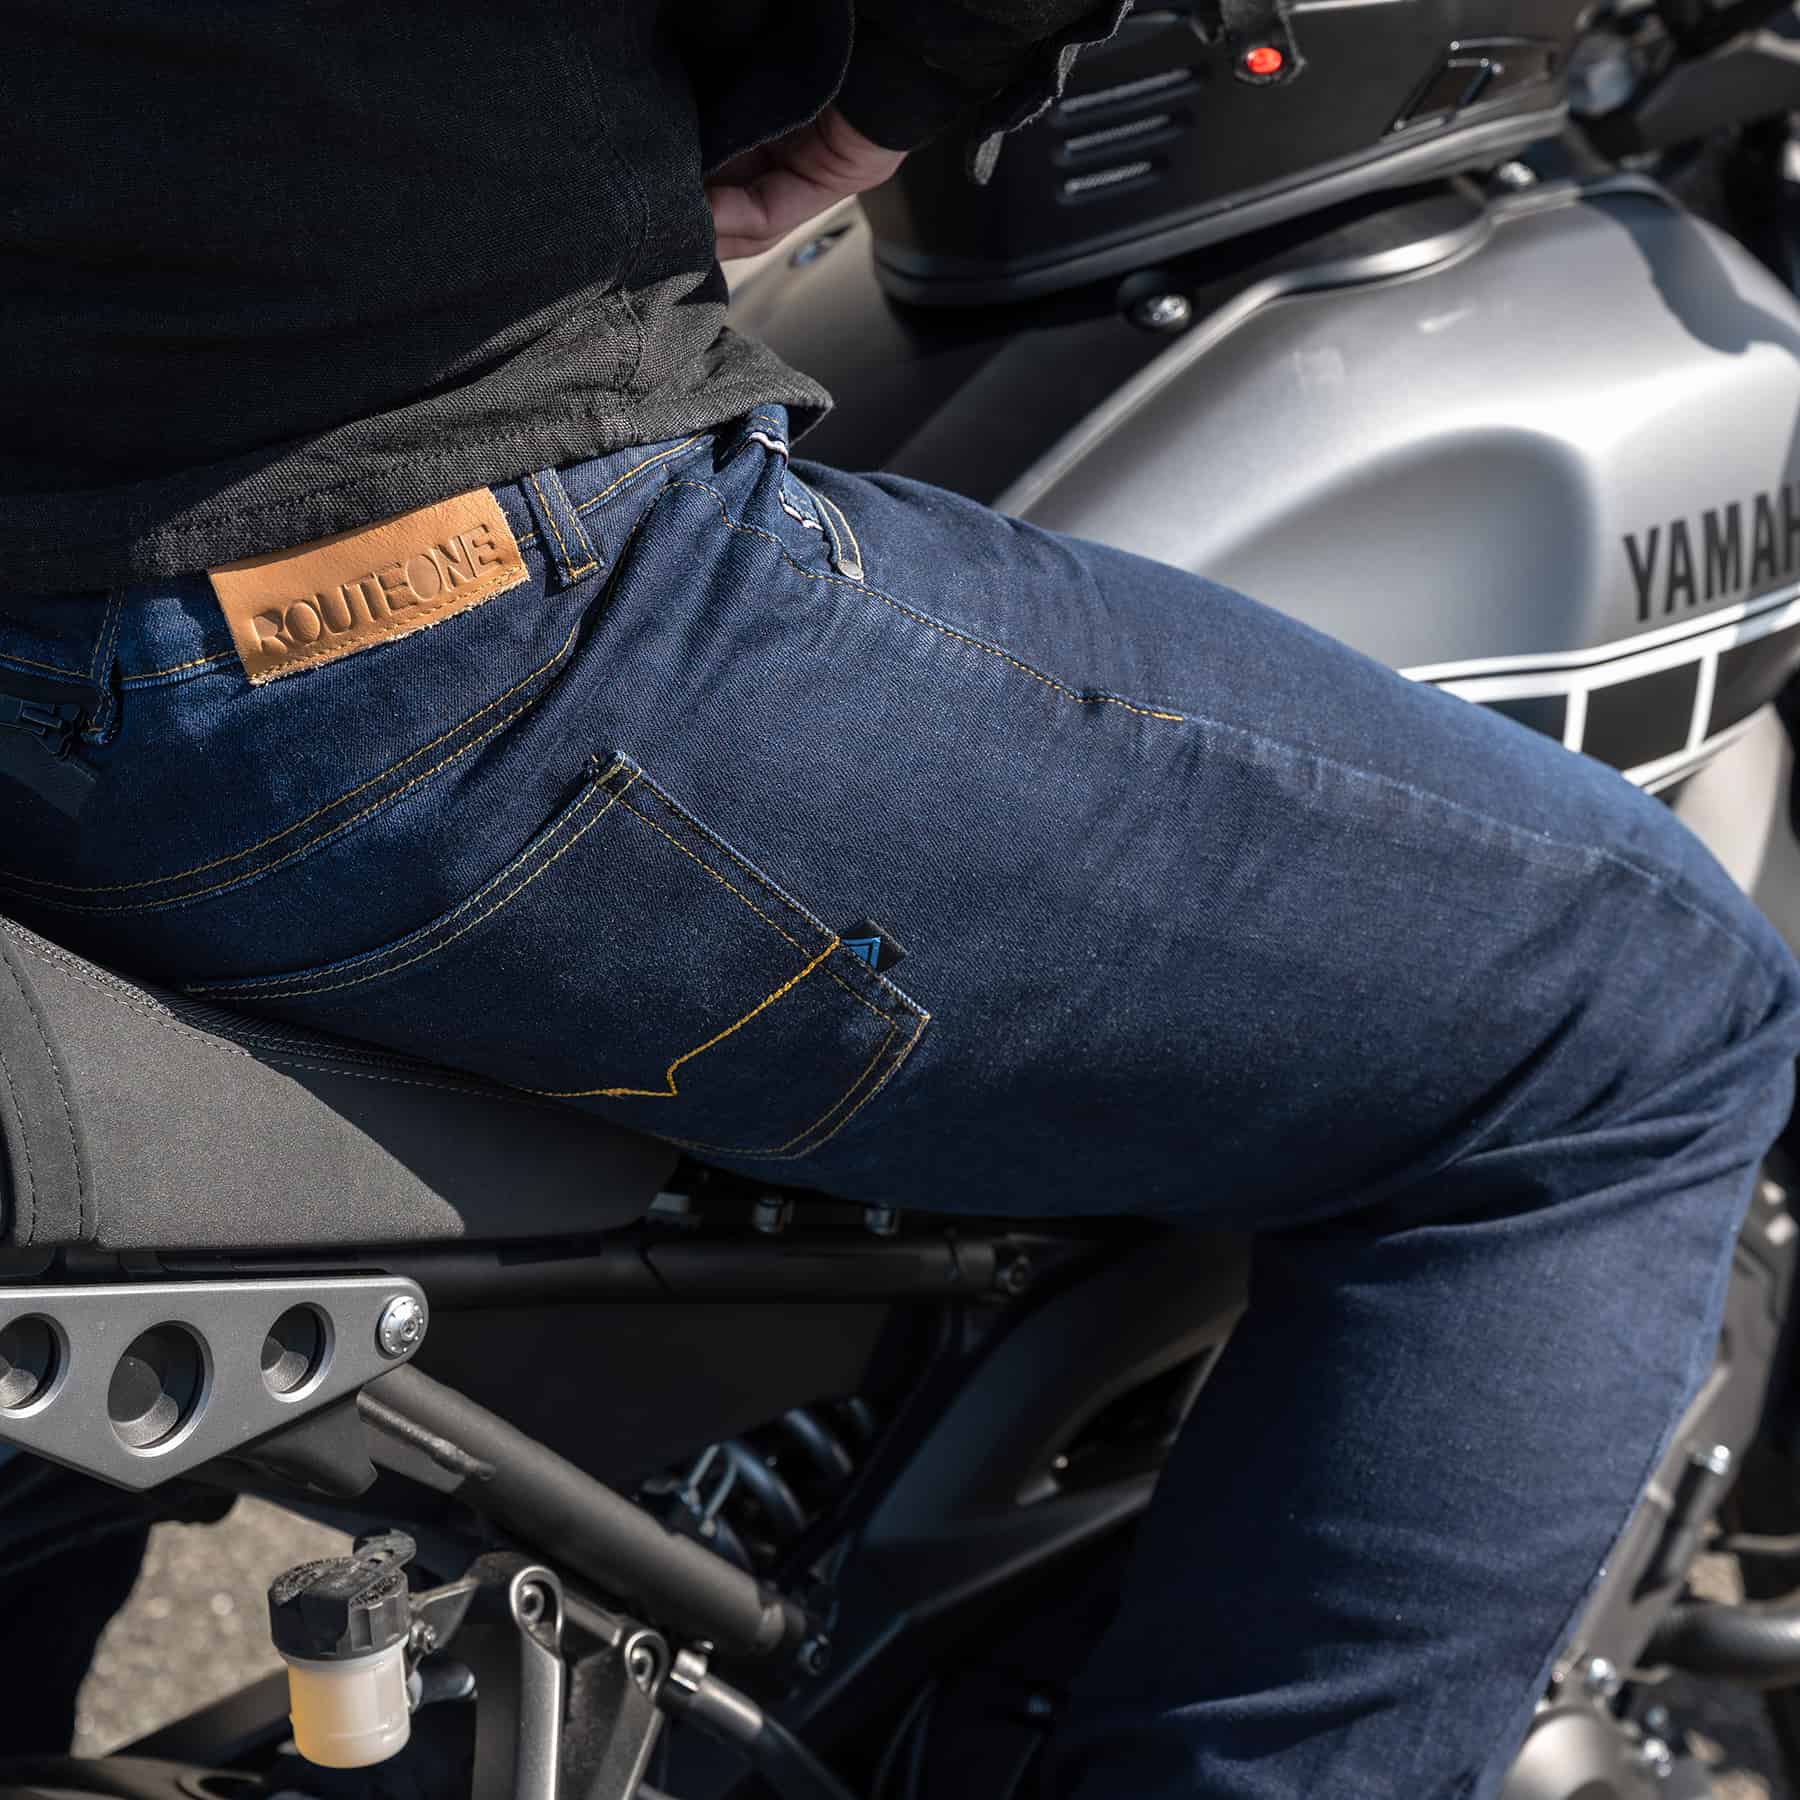 Route One Merlin Duke motorcycle riding jeans in black